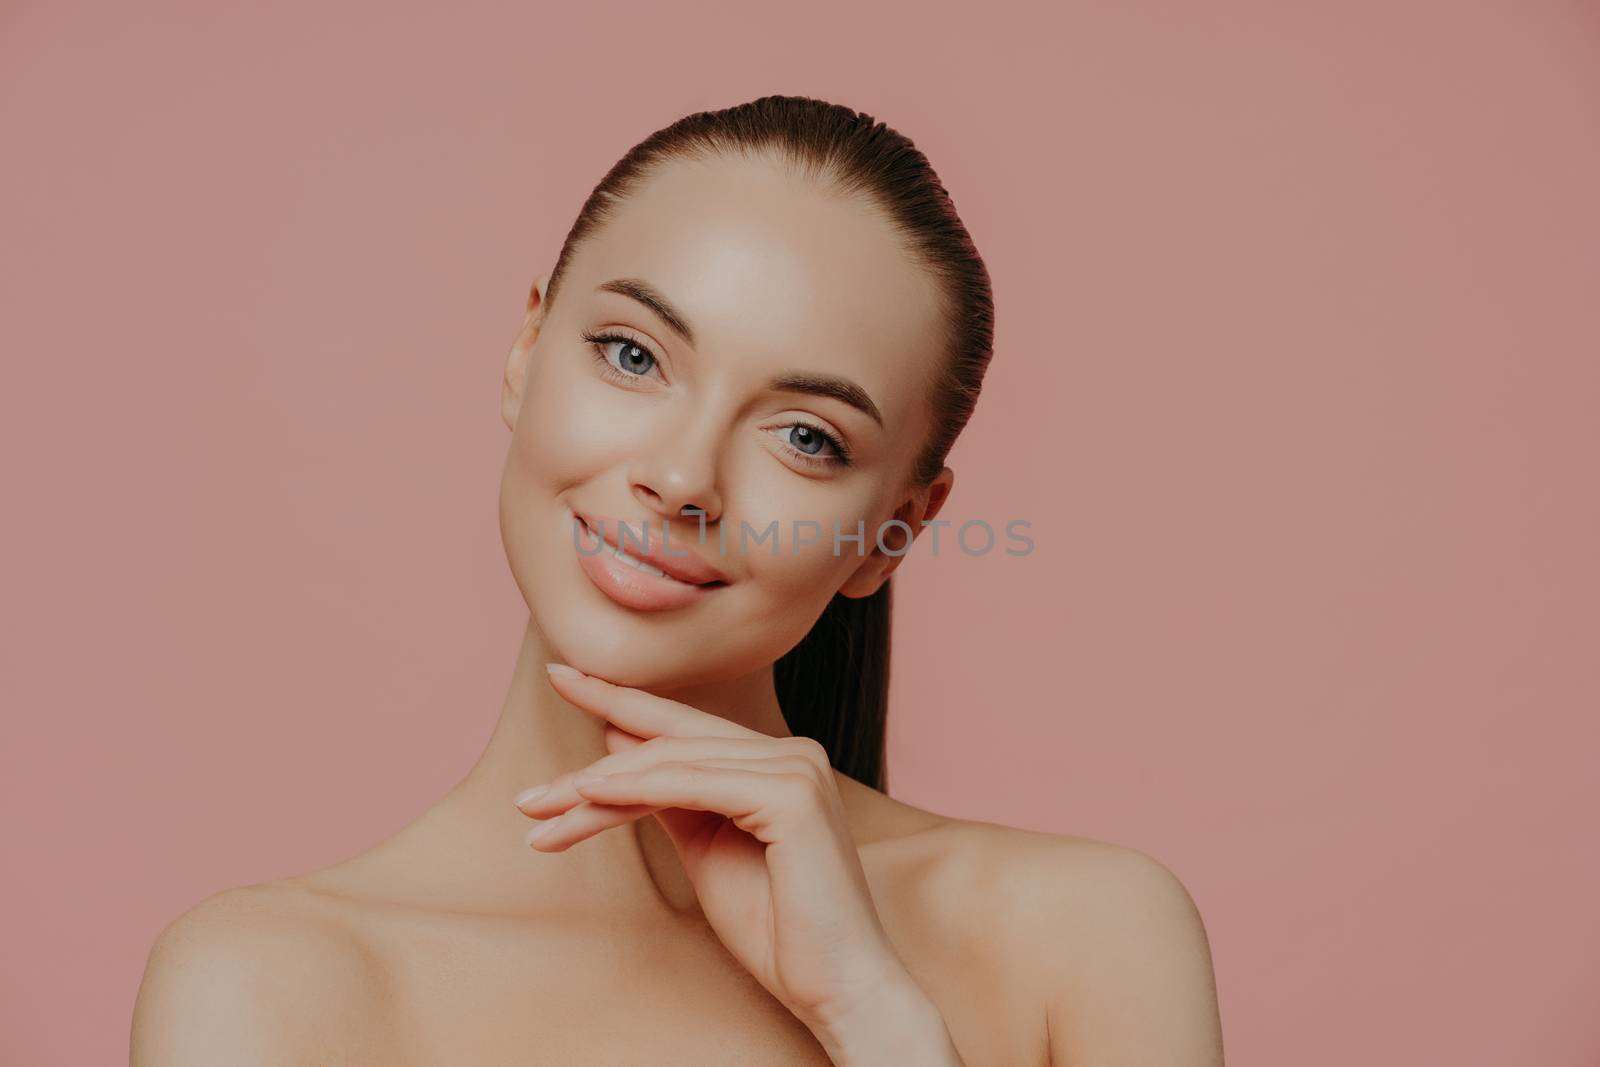 Charming beautiful woman with pony tail, touches perfect soft skin after cosmetology procedures, using beauty cream, stands with bare shouldes, poses against pink background. Natural as she is by vkstock